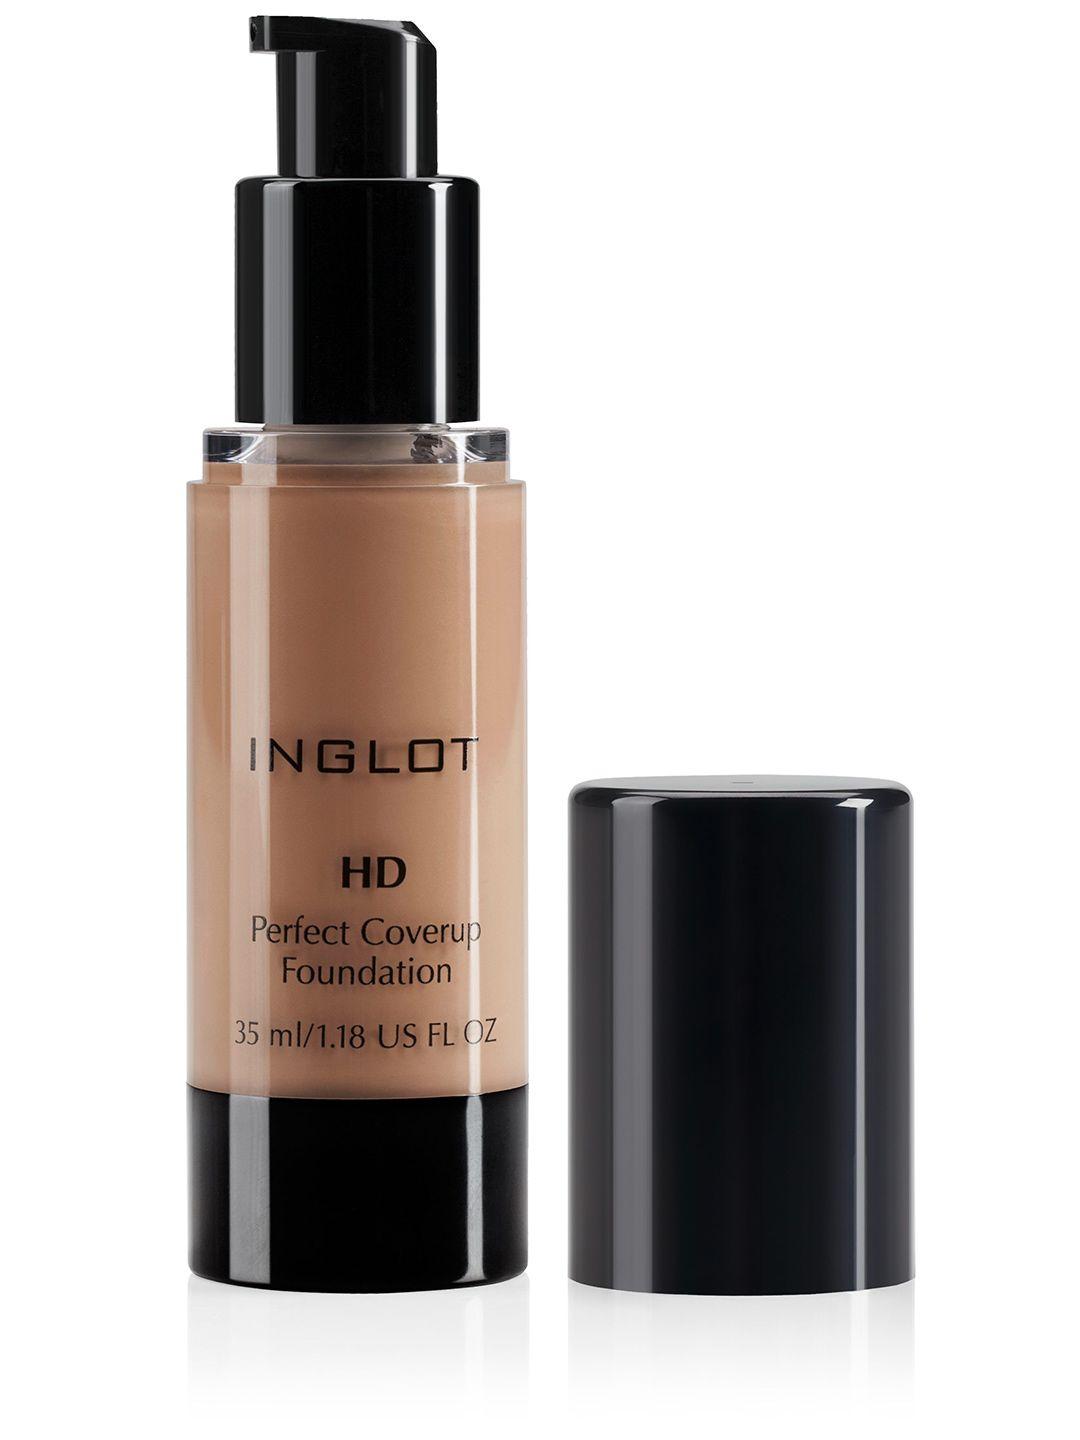 inglot hd perfect coverup foundation 35ml - nude 76